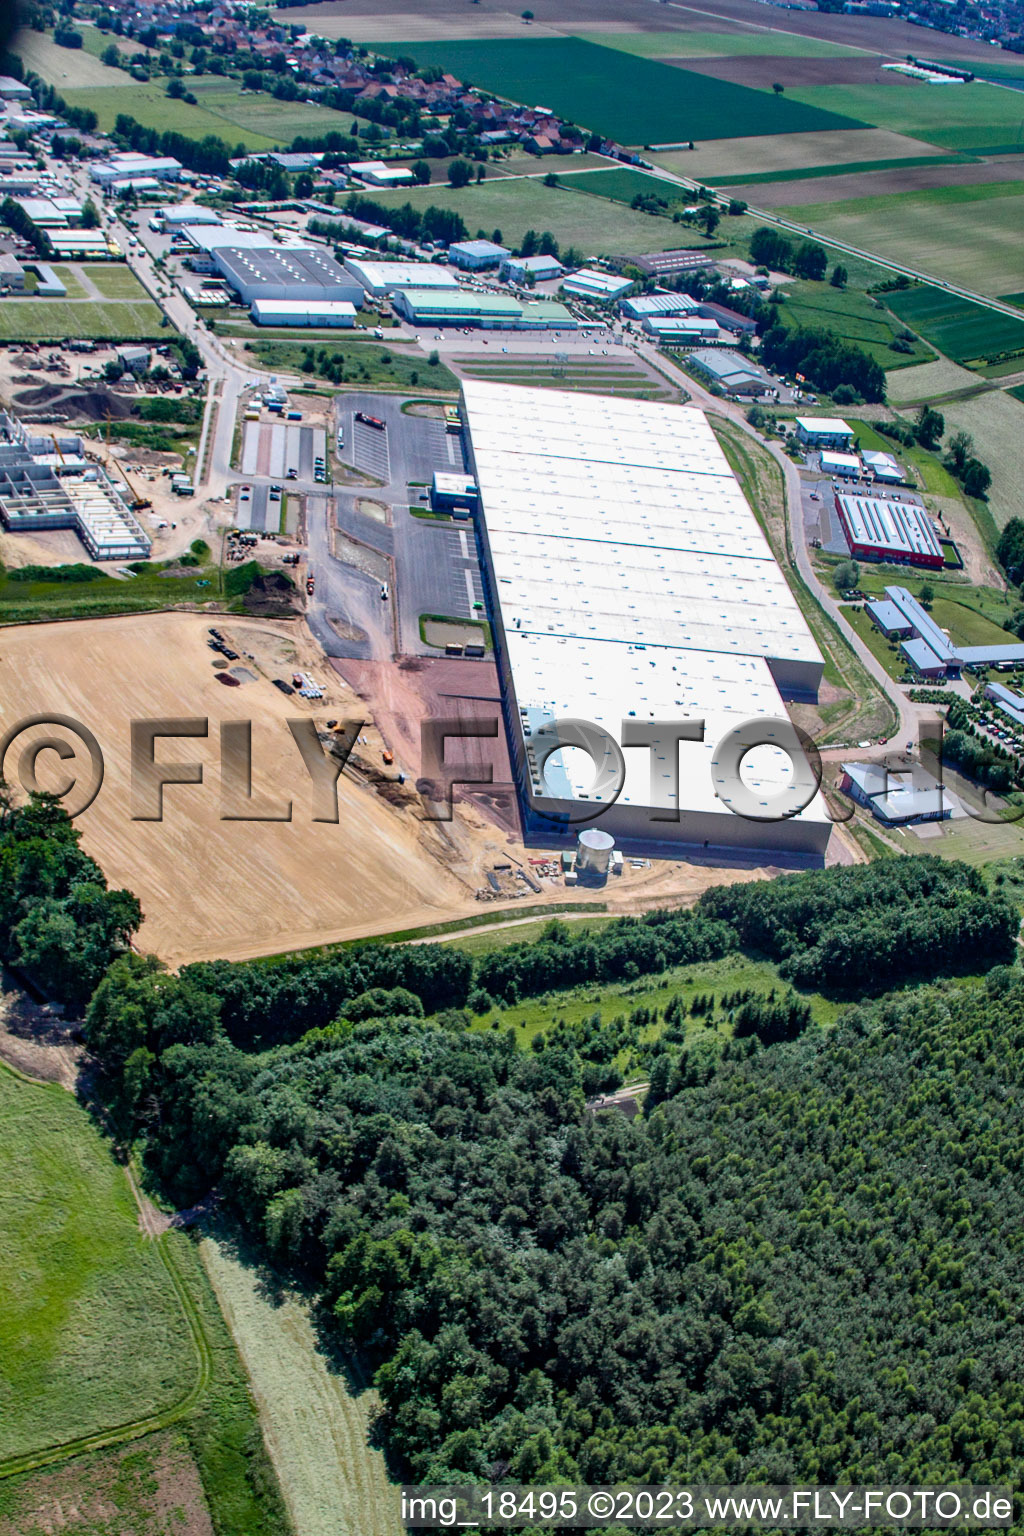 Aerial view of Coincidence logistics center in the district Minderslachen in Kandel in the state Rhineland-Palatinate, Germany